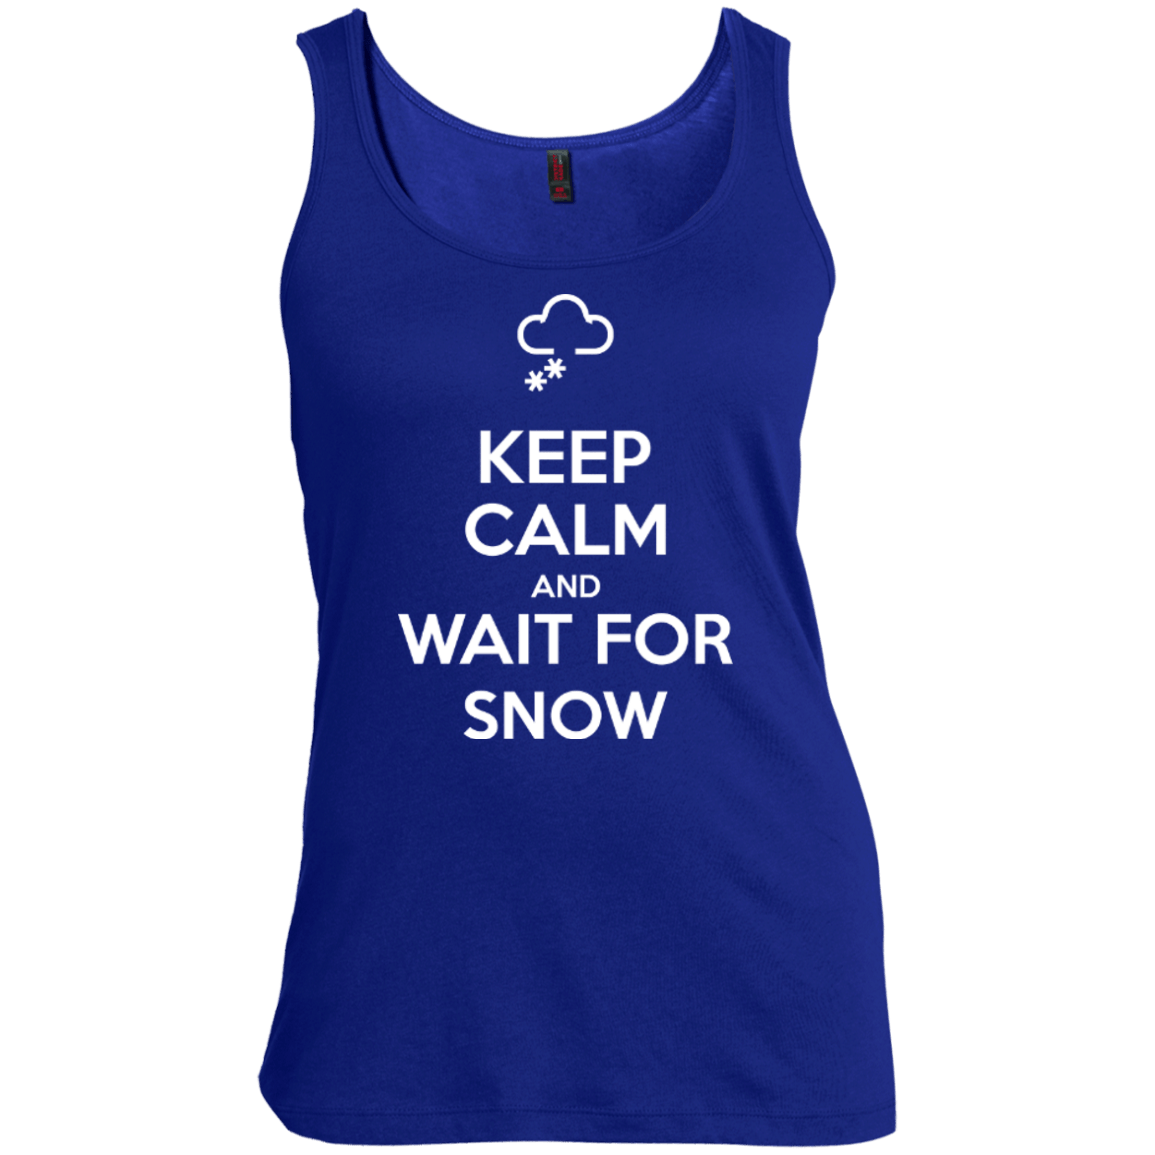 Keep Calm And Wait For Snow Tank Tops - Powderaddicts